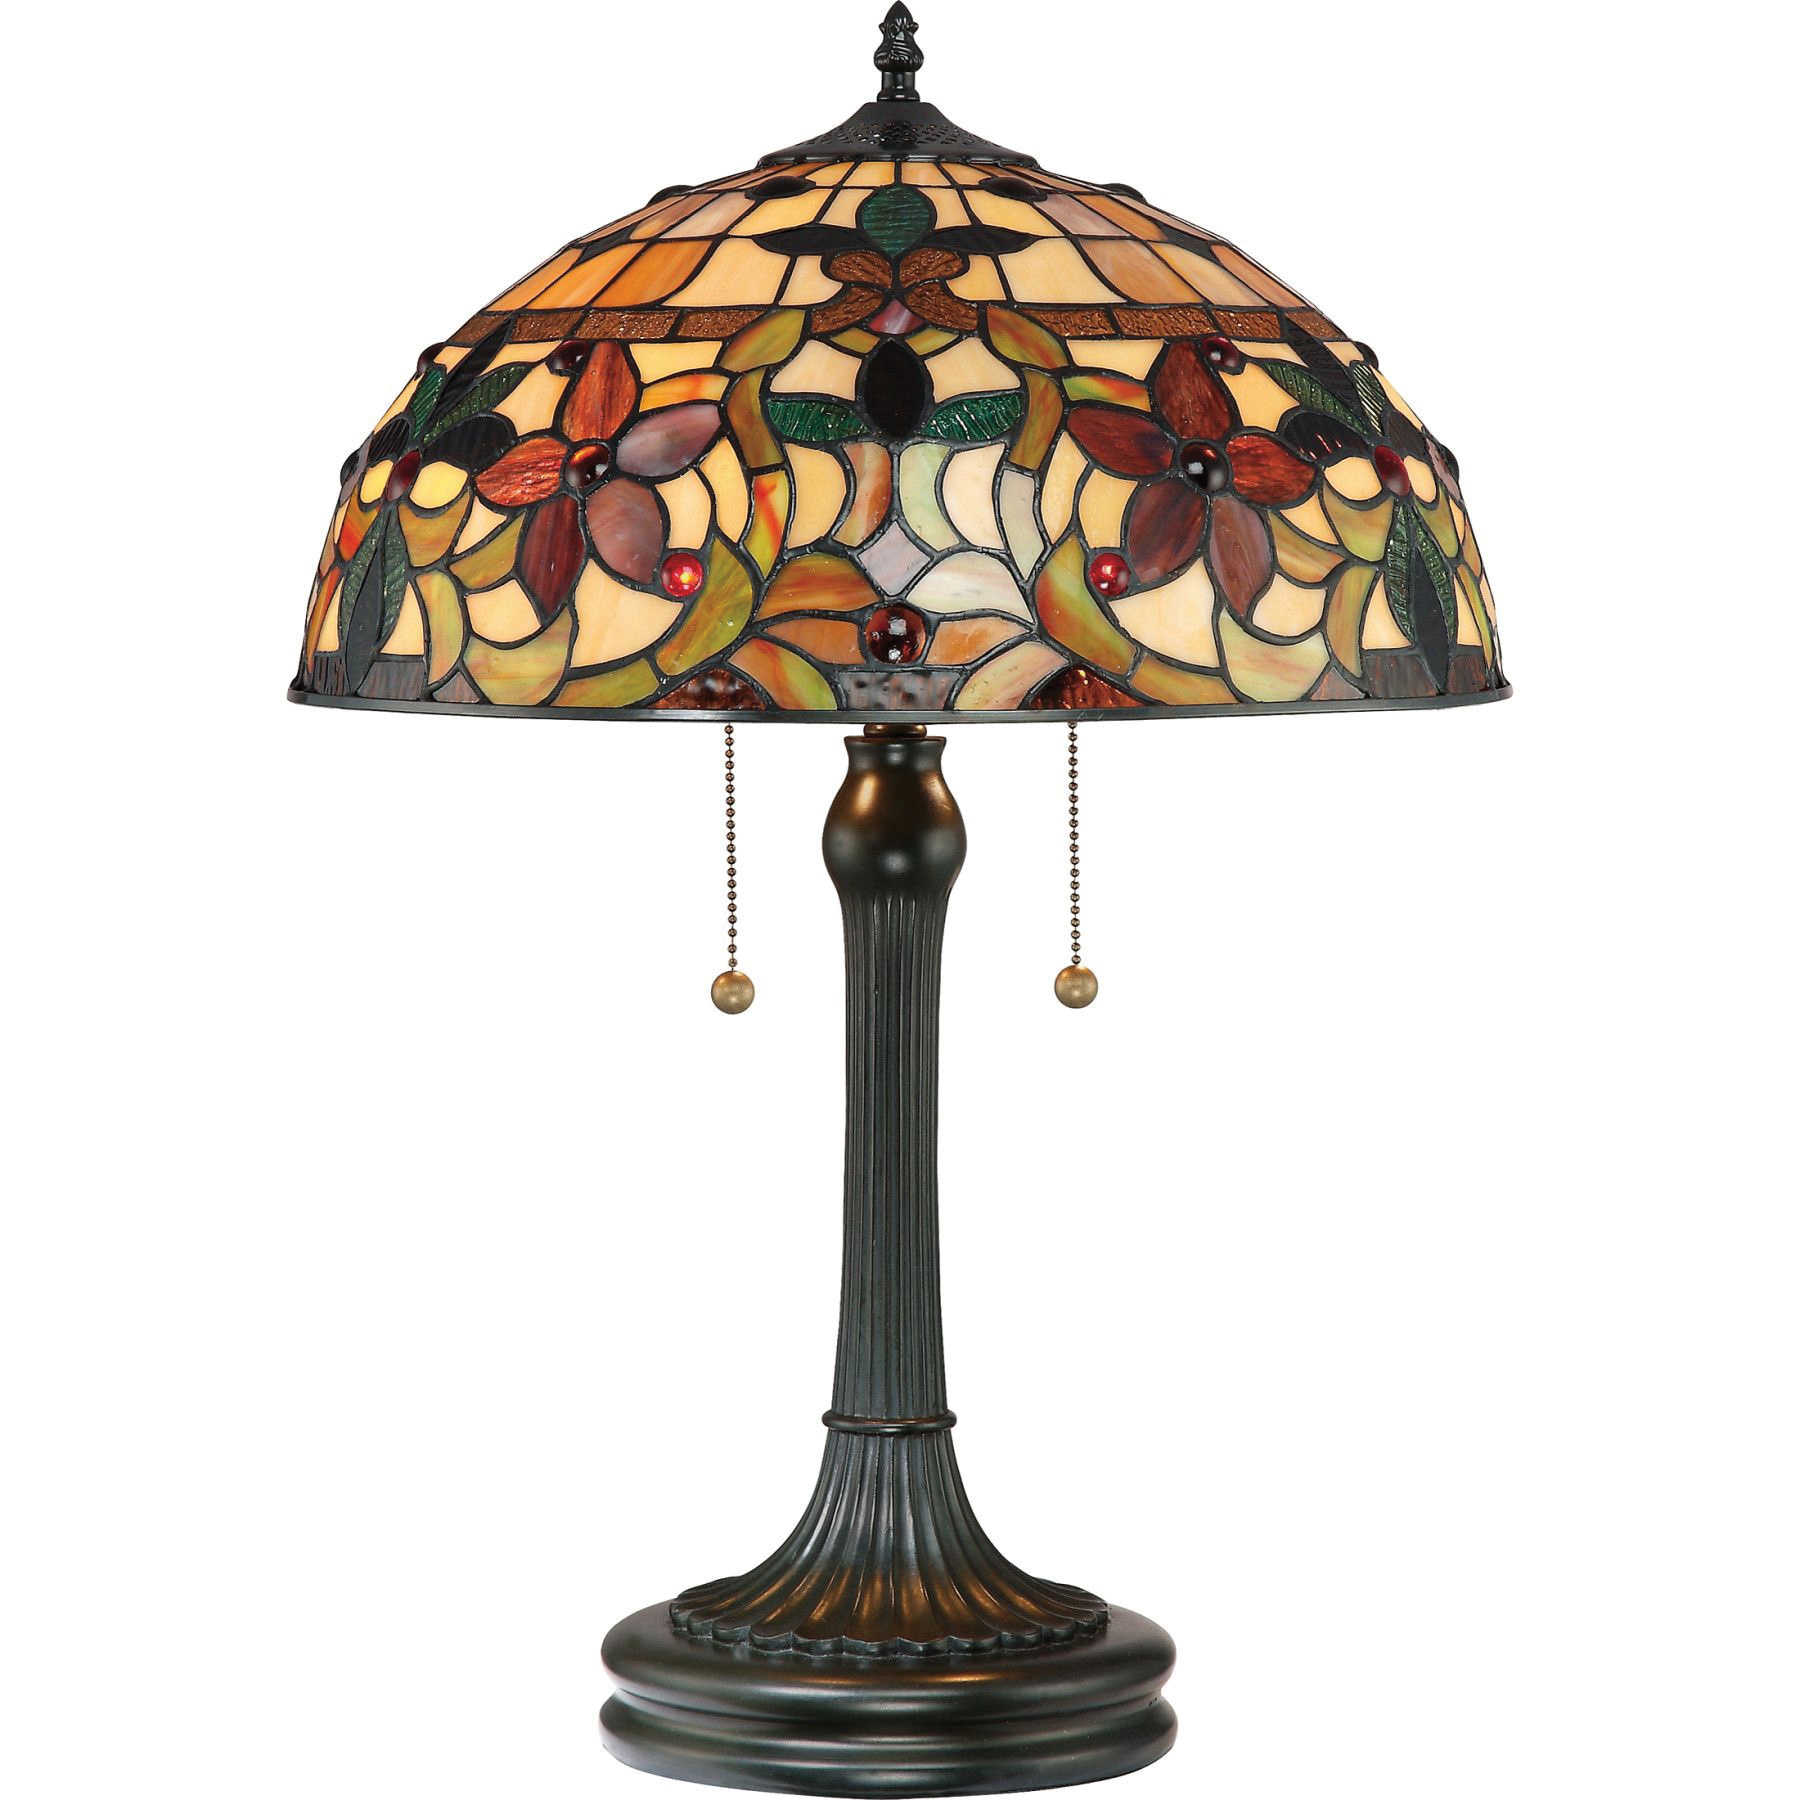 Quoizel Lighting Tf878t Portable Table Lamp 75 Watt 120 Volt Ac Vintage Bronze Kami intended for proportions 1800 X 1800